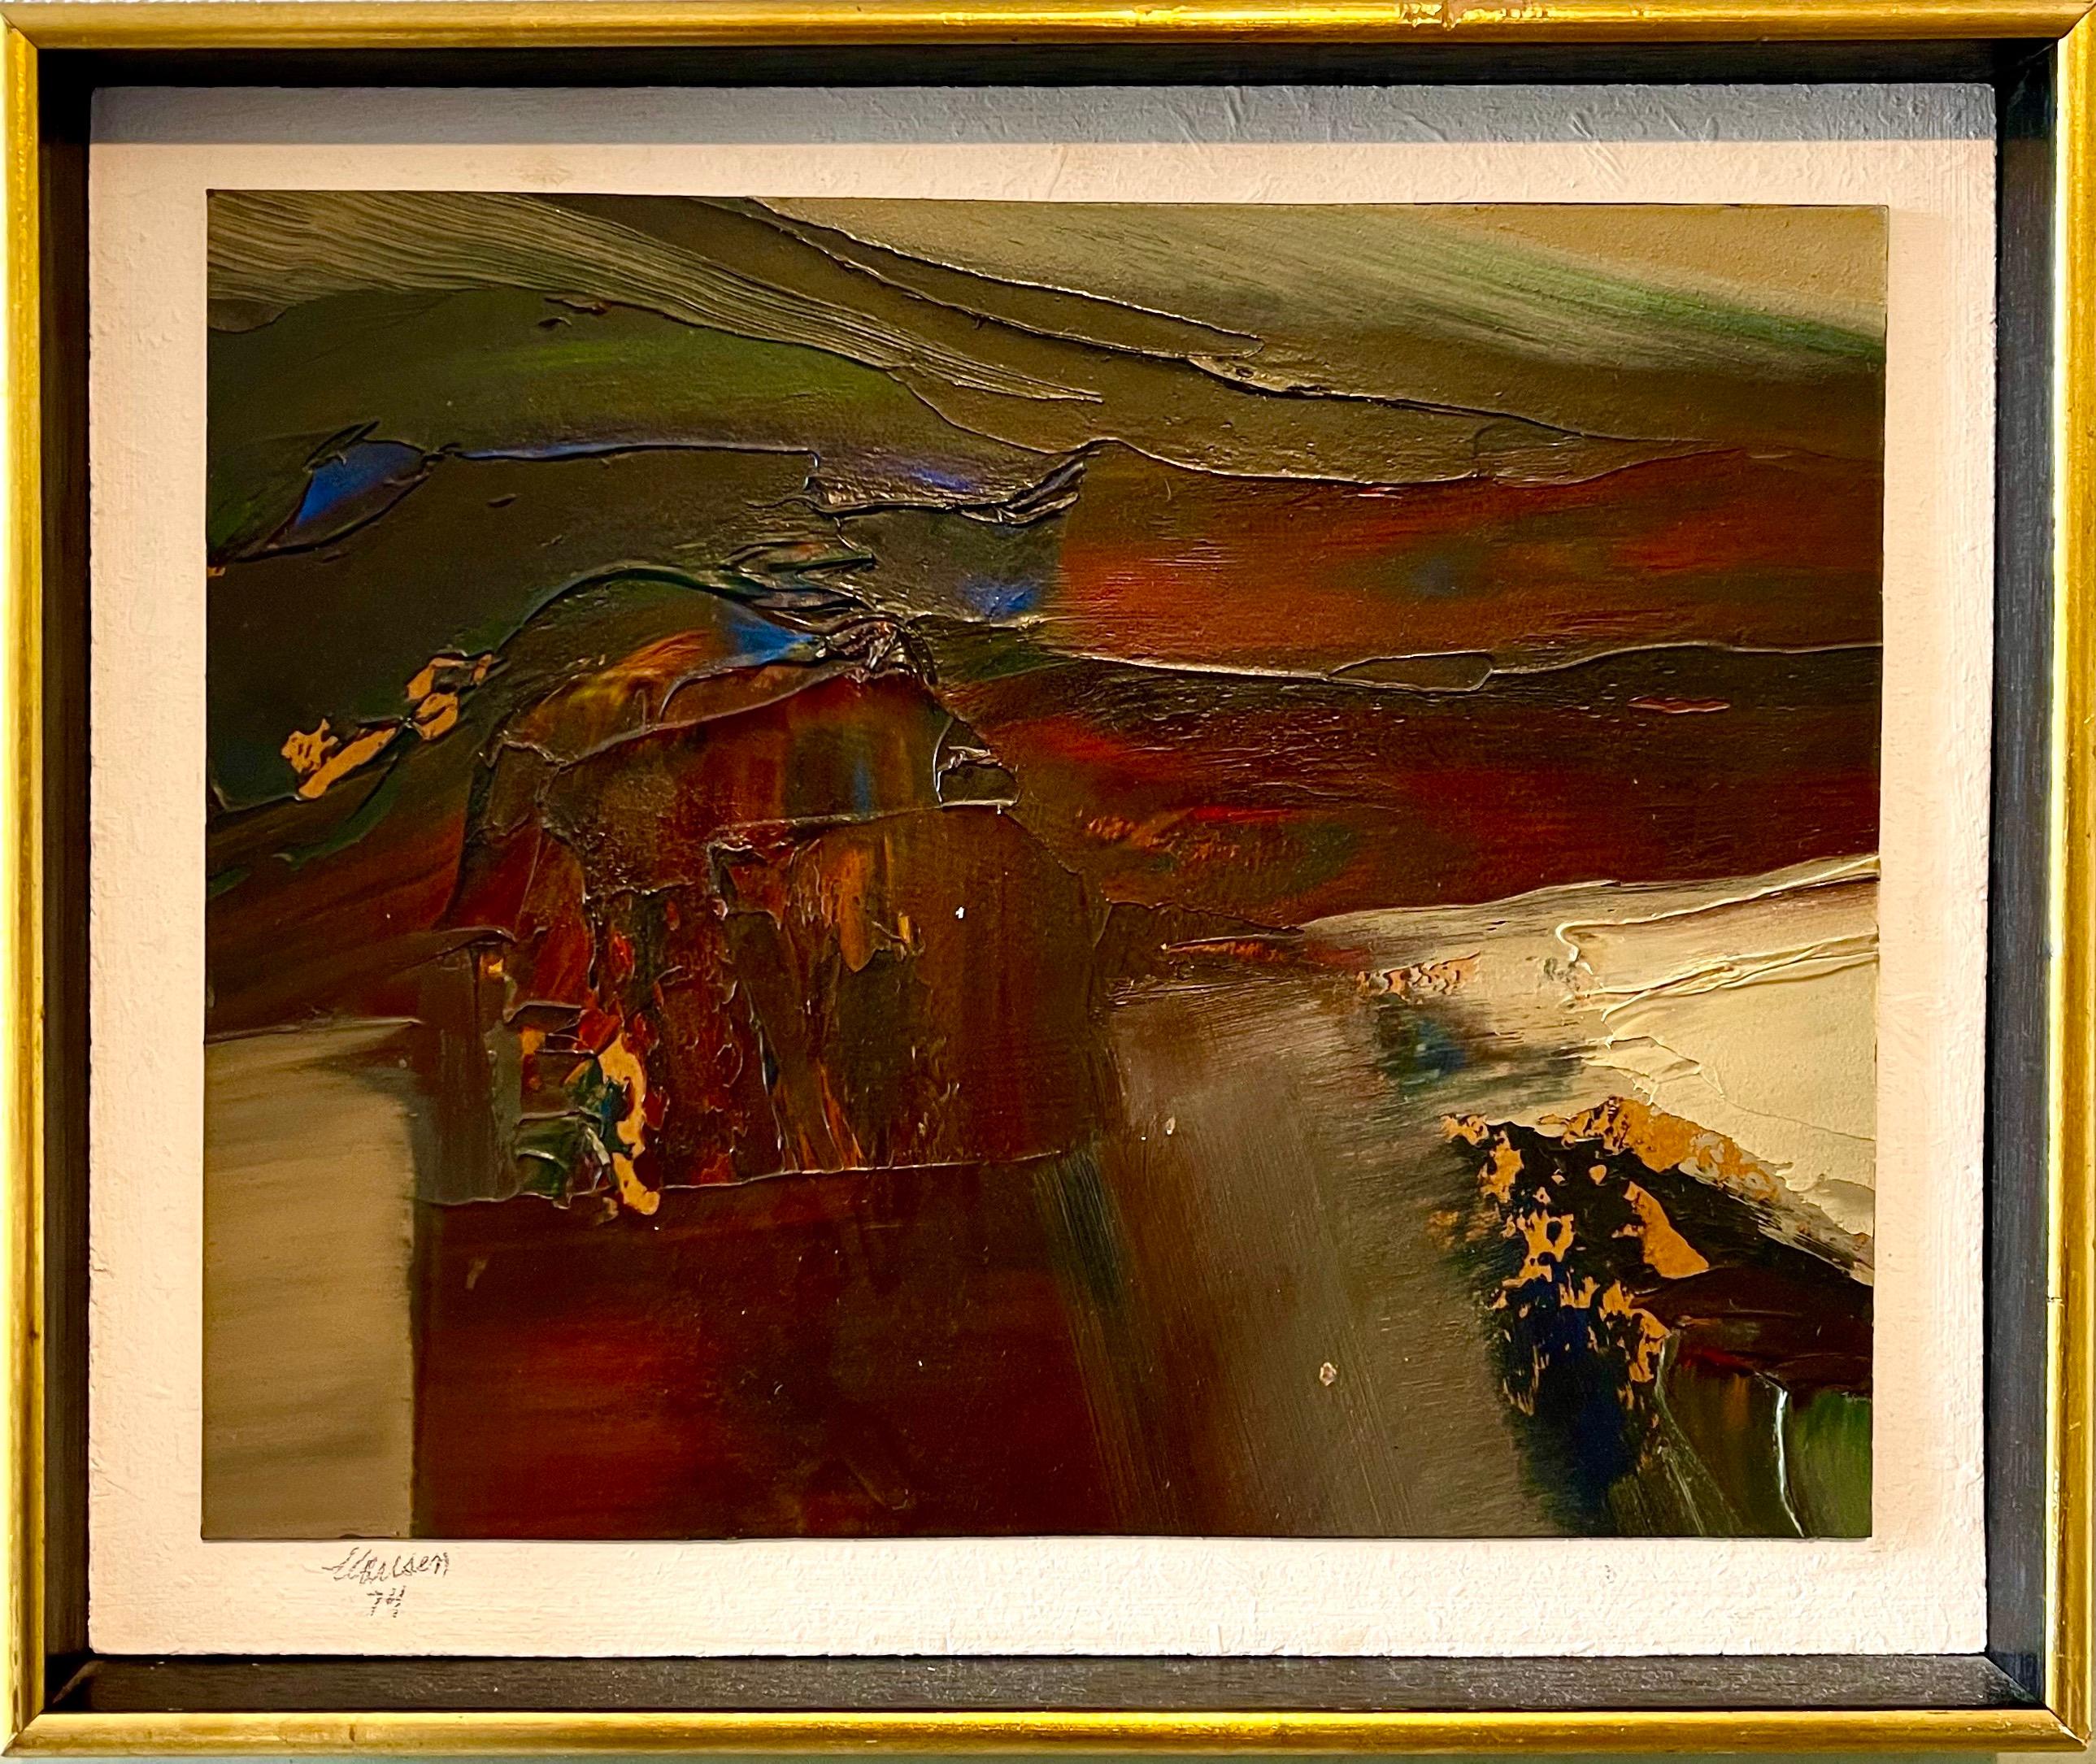 1974 California Bay Area Abstract Expressionist Bold Oil Painting Don Clausen For Sale 3